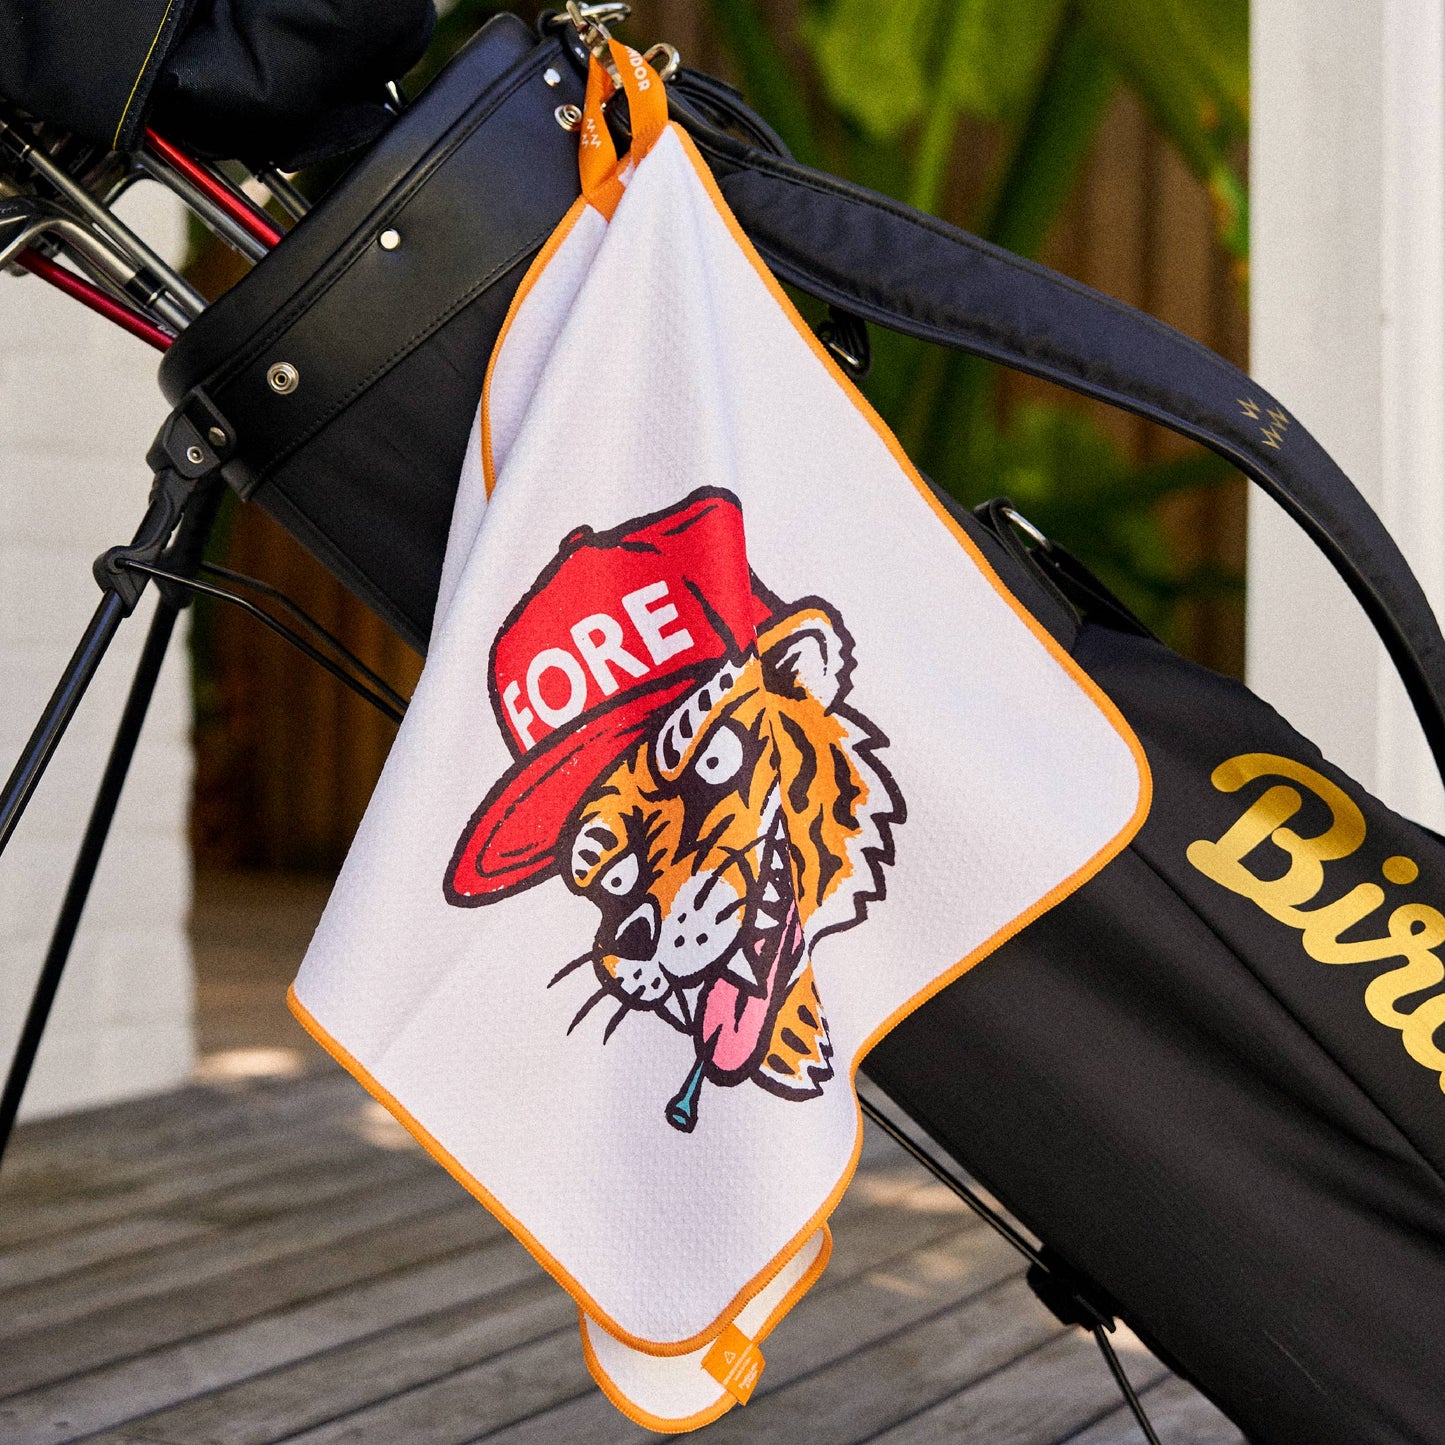 Fore Tiger Golf Towel